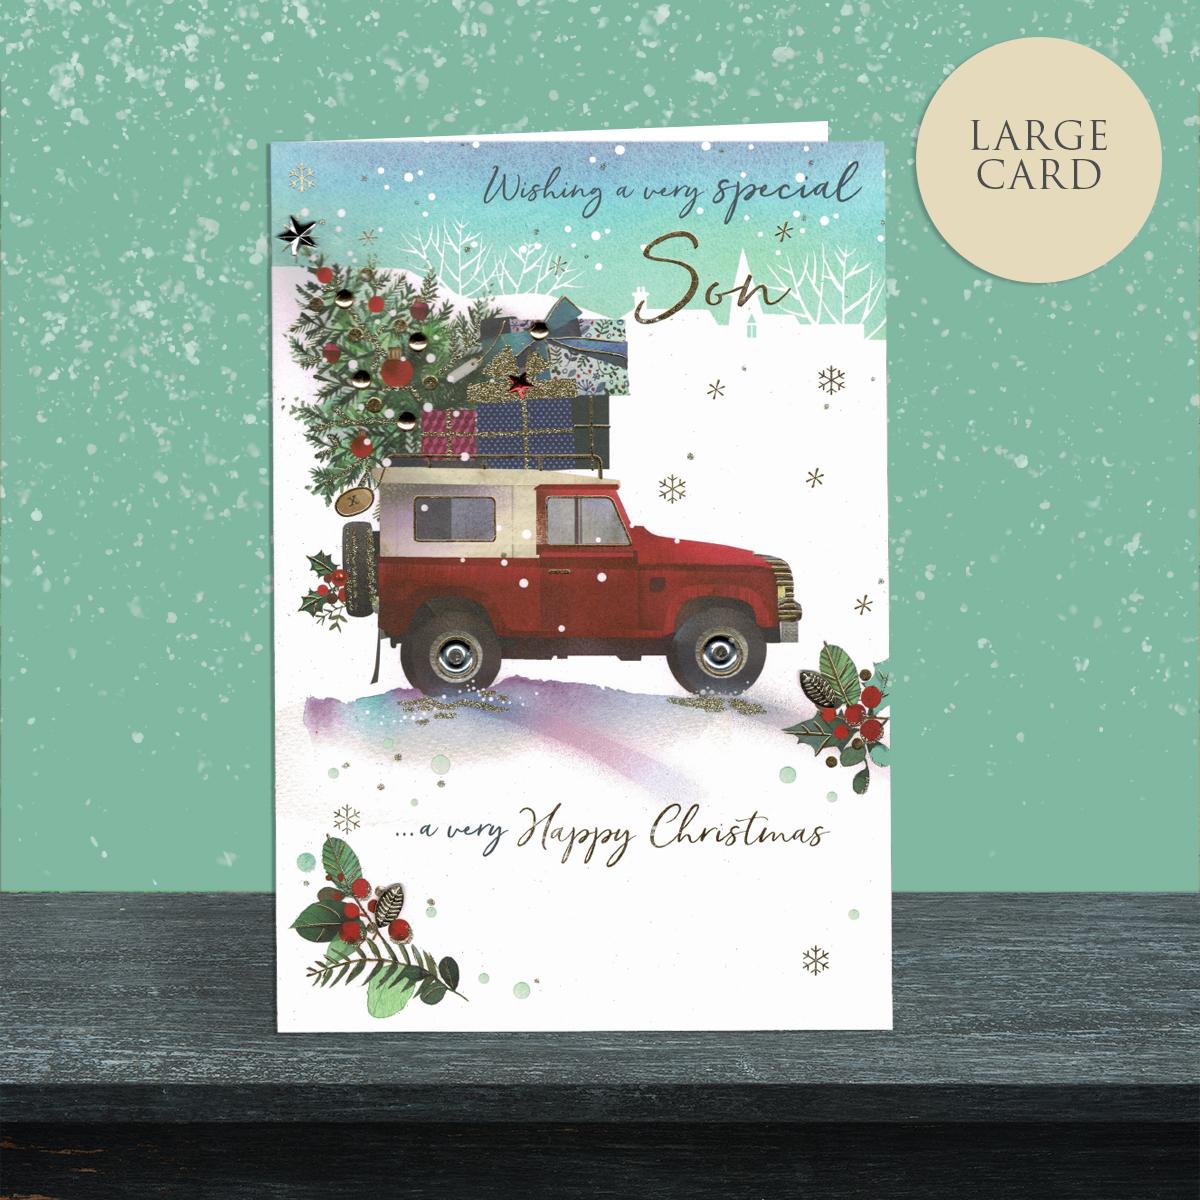 Wishing A Very Special Son A Very Happy Christmas. This Card Shows A Truck Bringing Home The Christmas Tree And Gifts. Embellished And With A Double Page Insert. Finished With A Silver Envelope